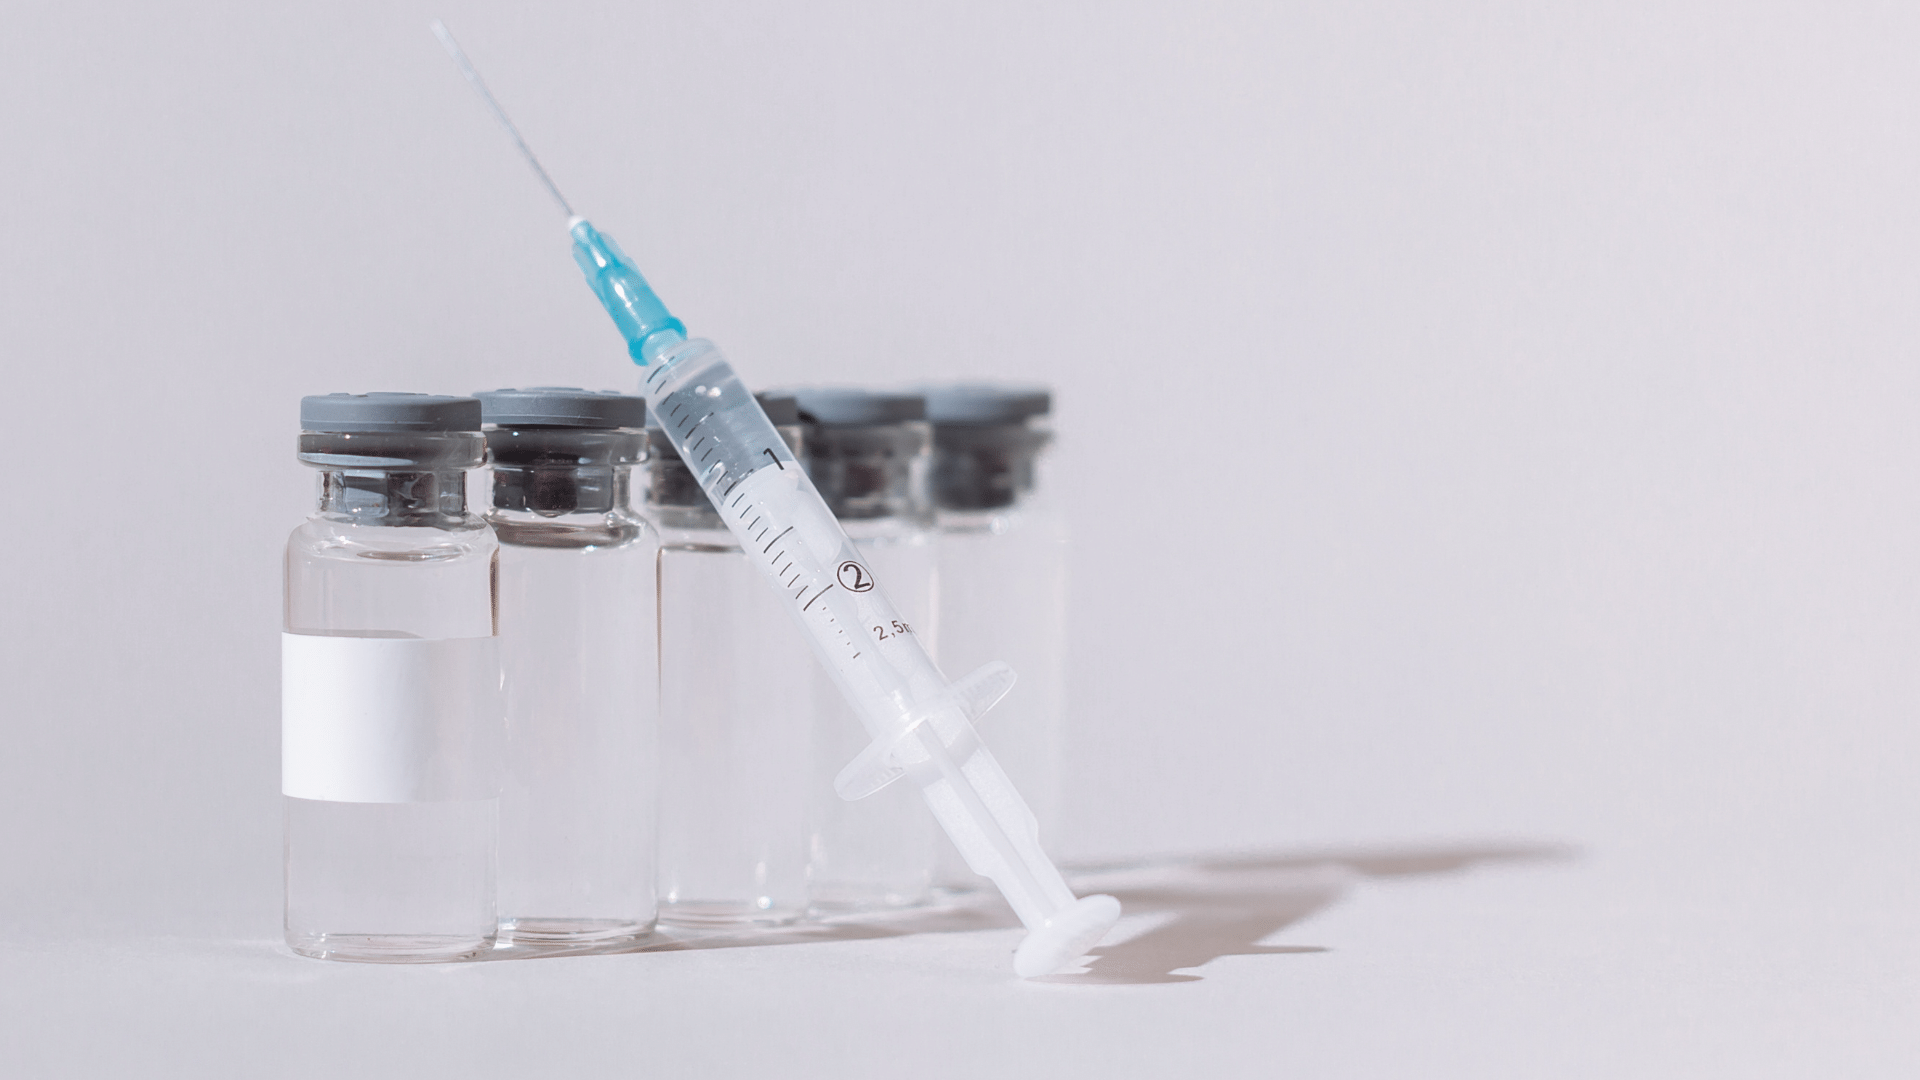 UNITED STATES IN FAVOR OF THE RELEASE OF PATENTS FOR THE VACCINE AGAINST COVID-19